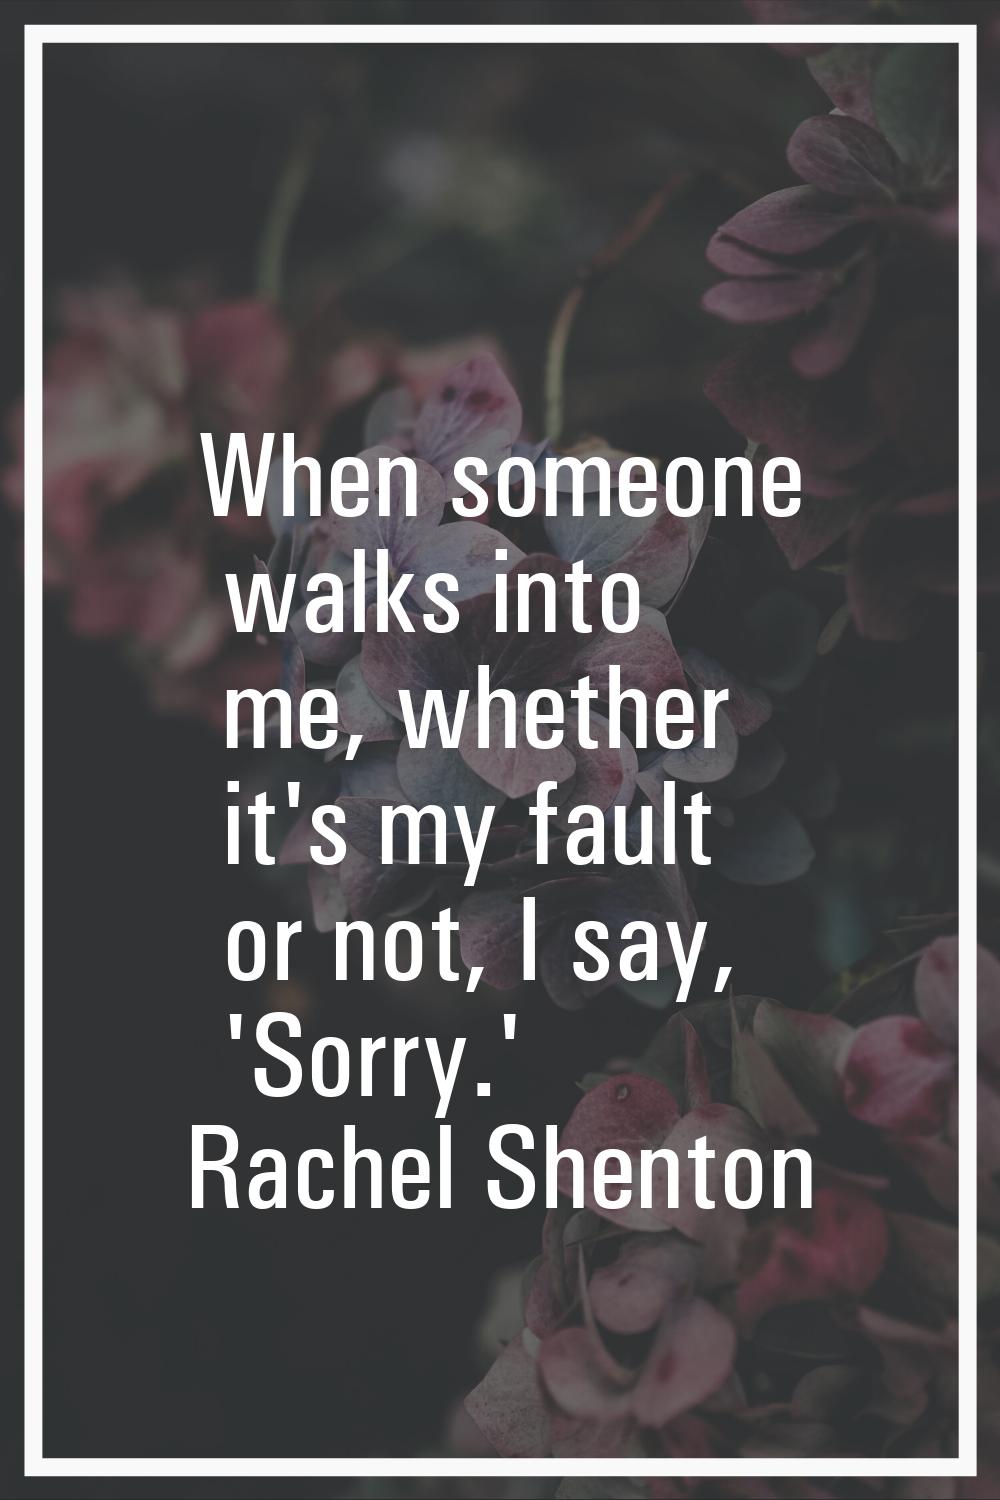 When someone walks into me, whether it's my fault or not, I say, 'Sorry.'